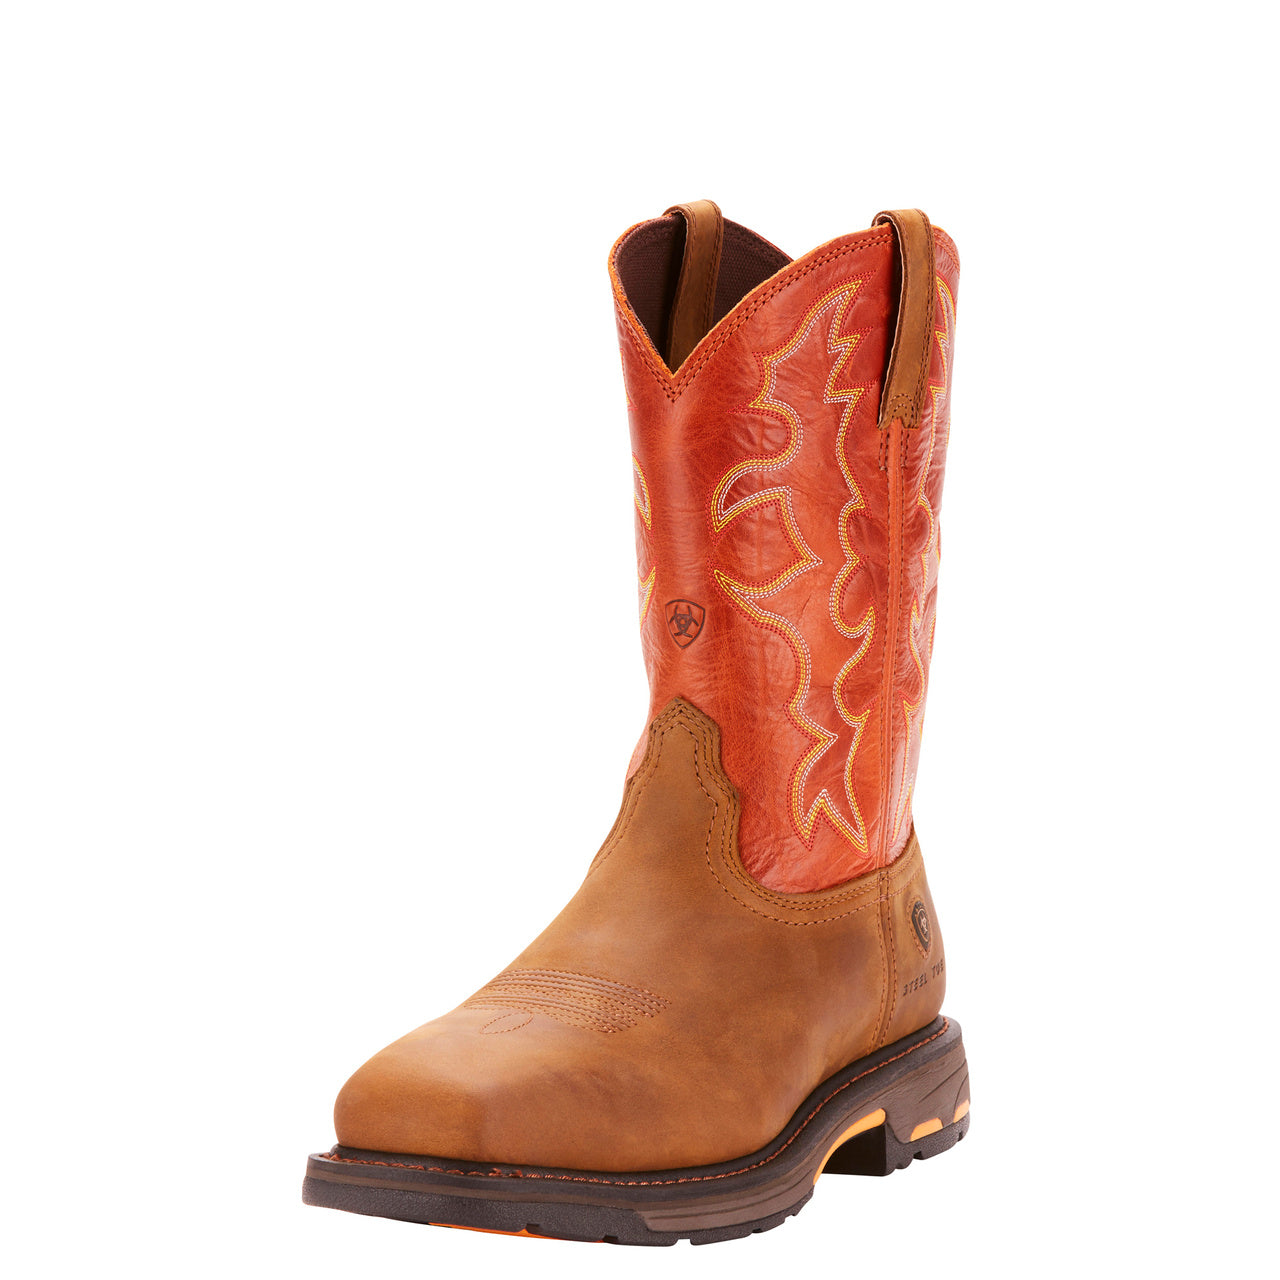 Ariat Workhog Wide Square Toe Boot 9.5 EE